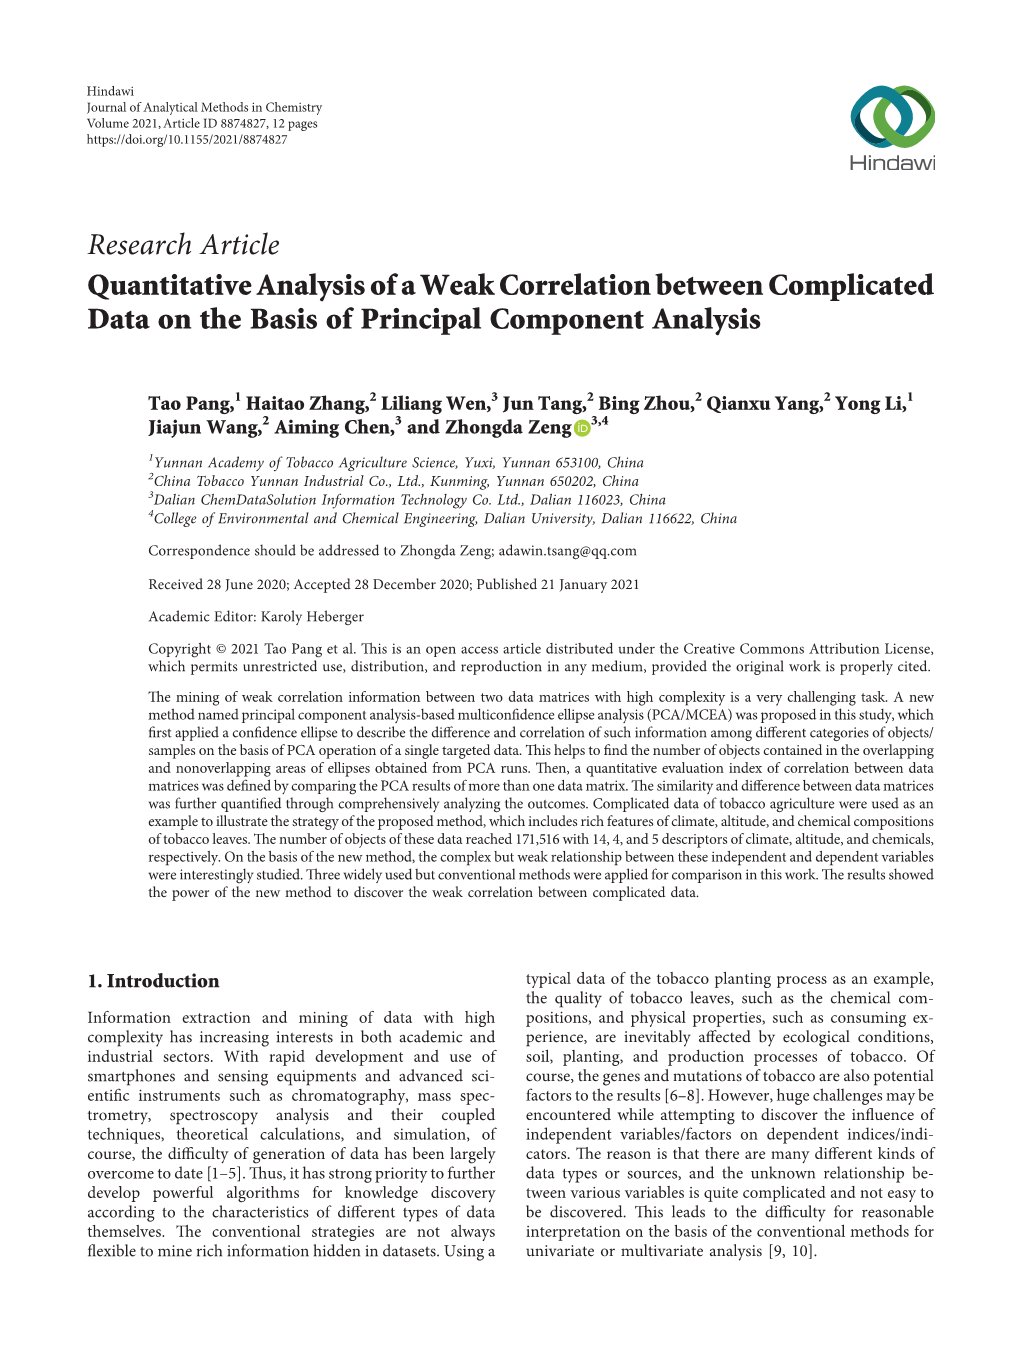 Quantitative Analysis of a Weak Correlation Between Complicated Data on the Basis of Principal Component Analysis